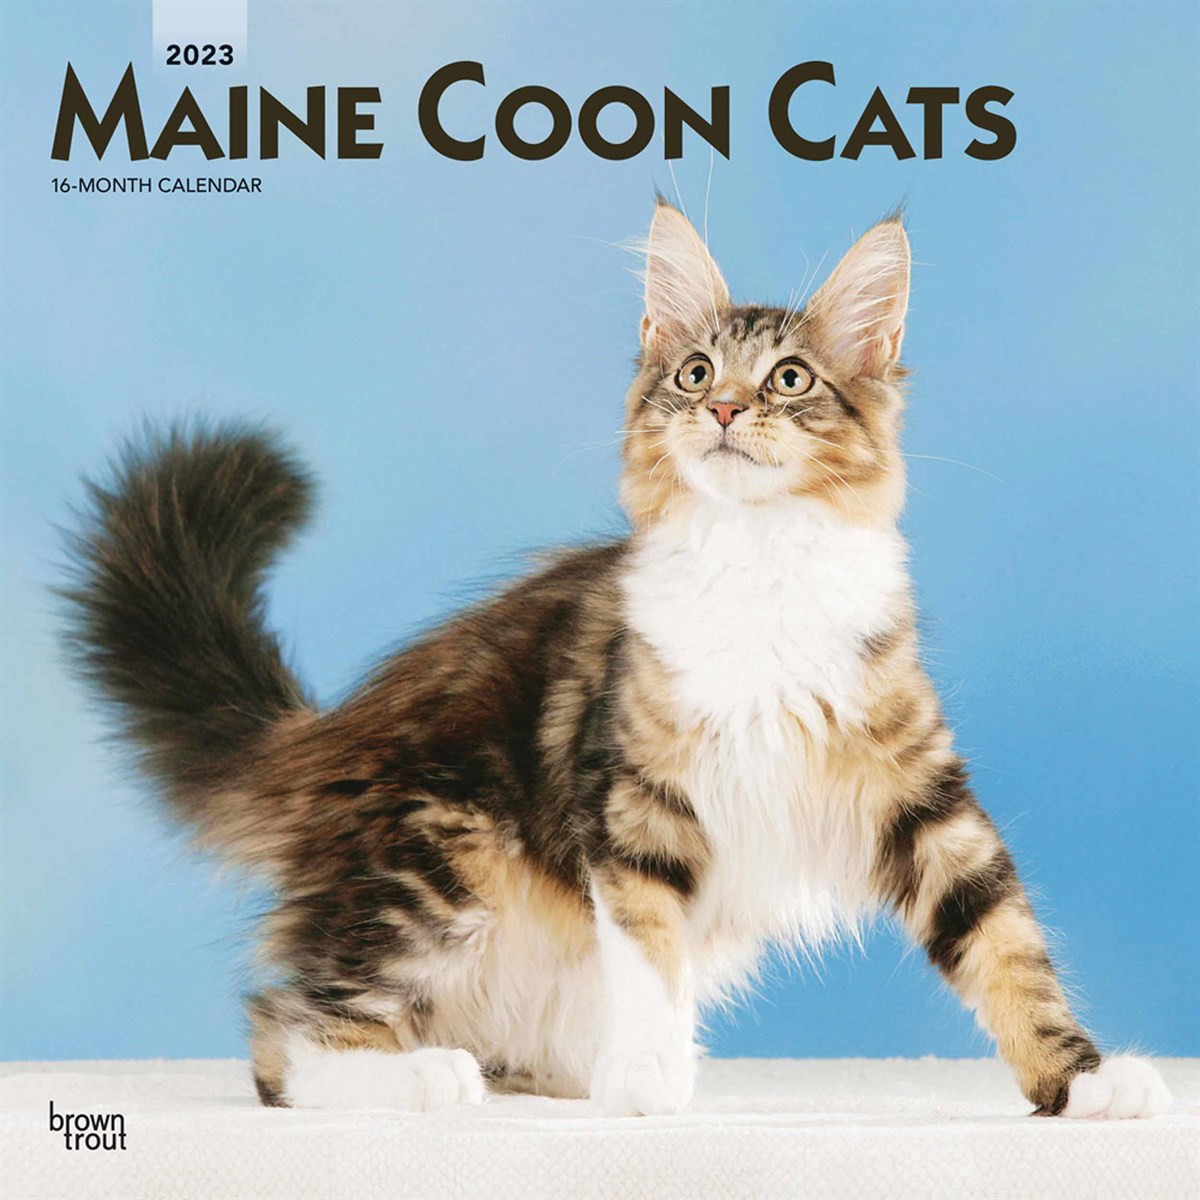 Maine Coon Cats 2023 Calendars